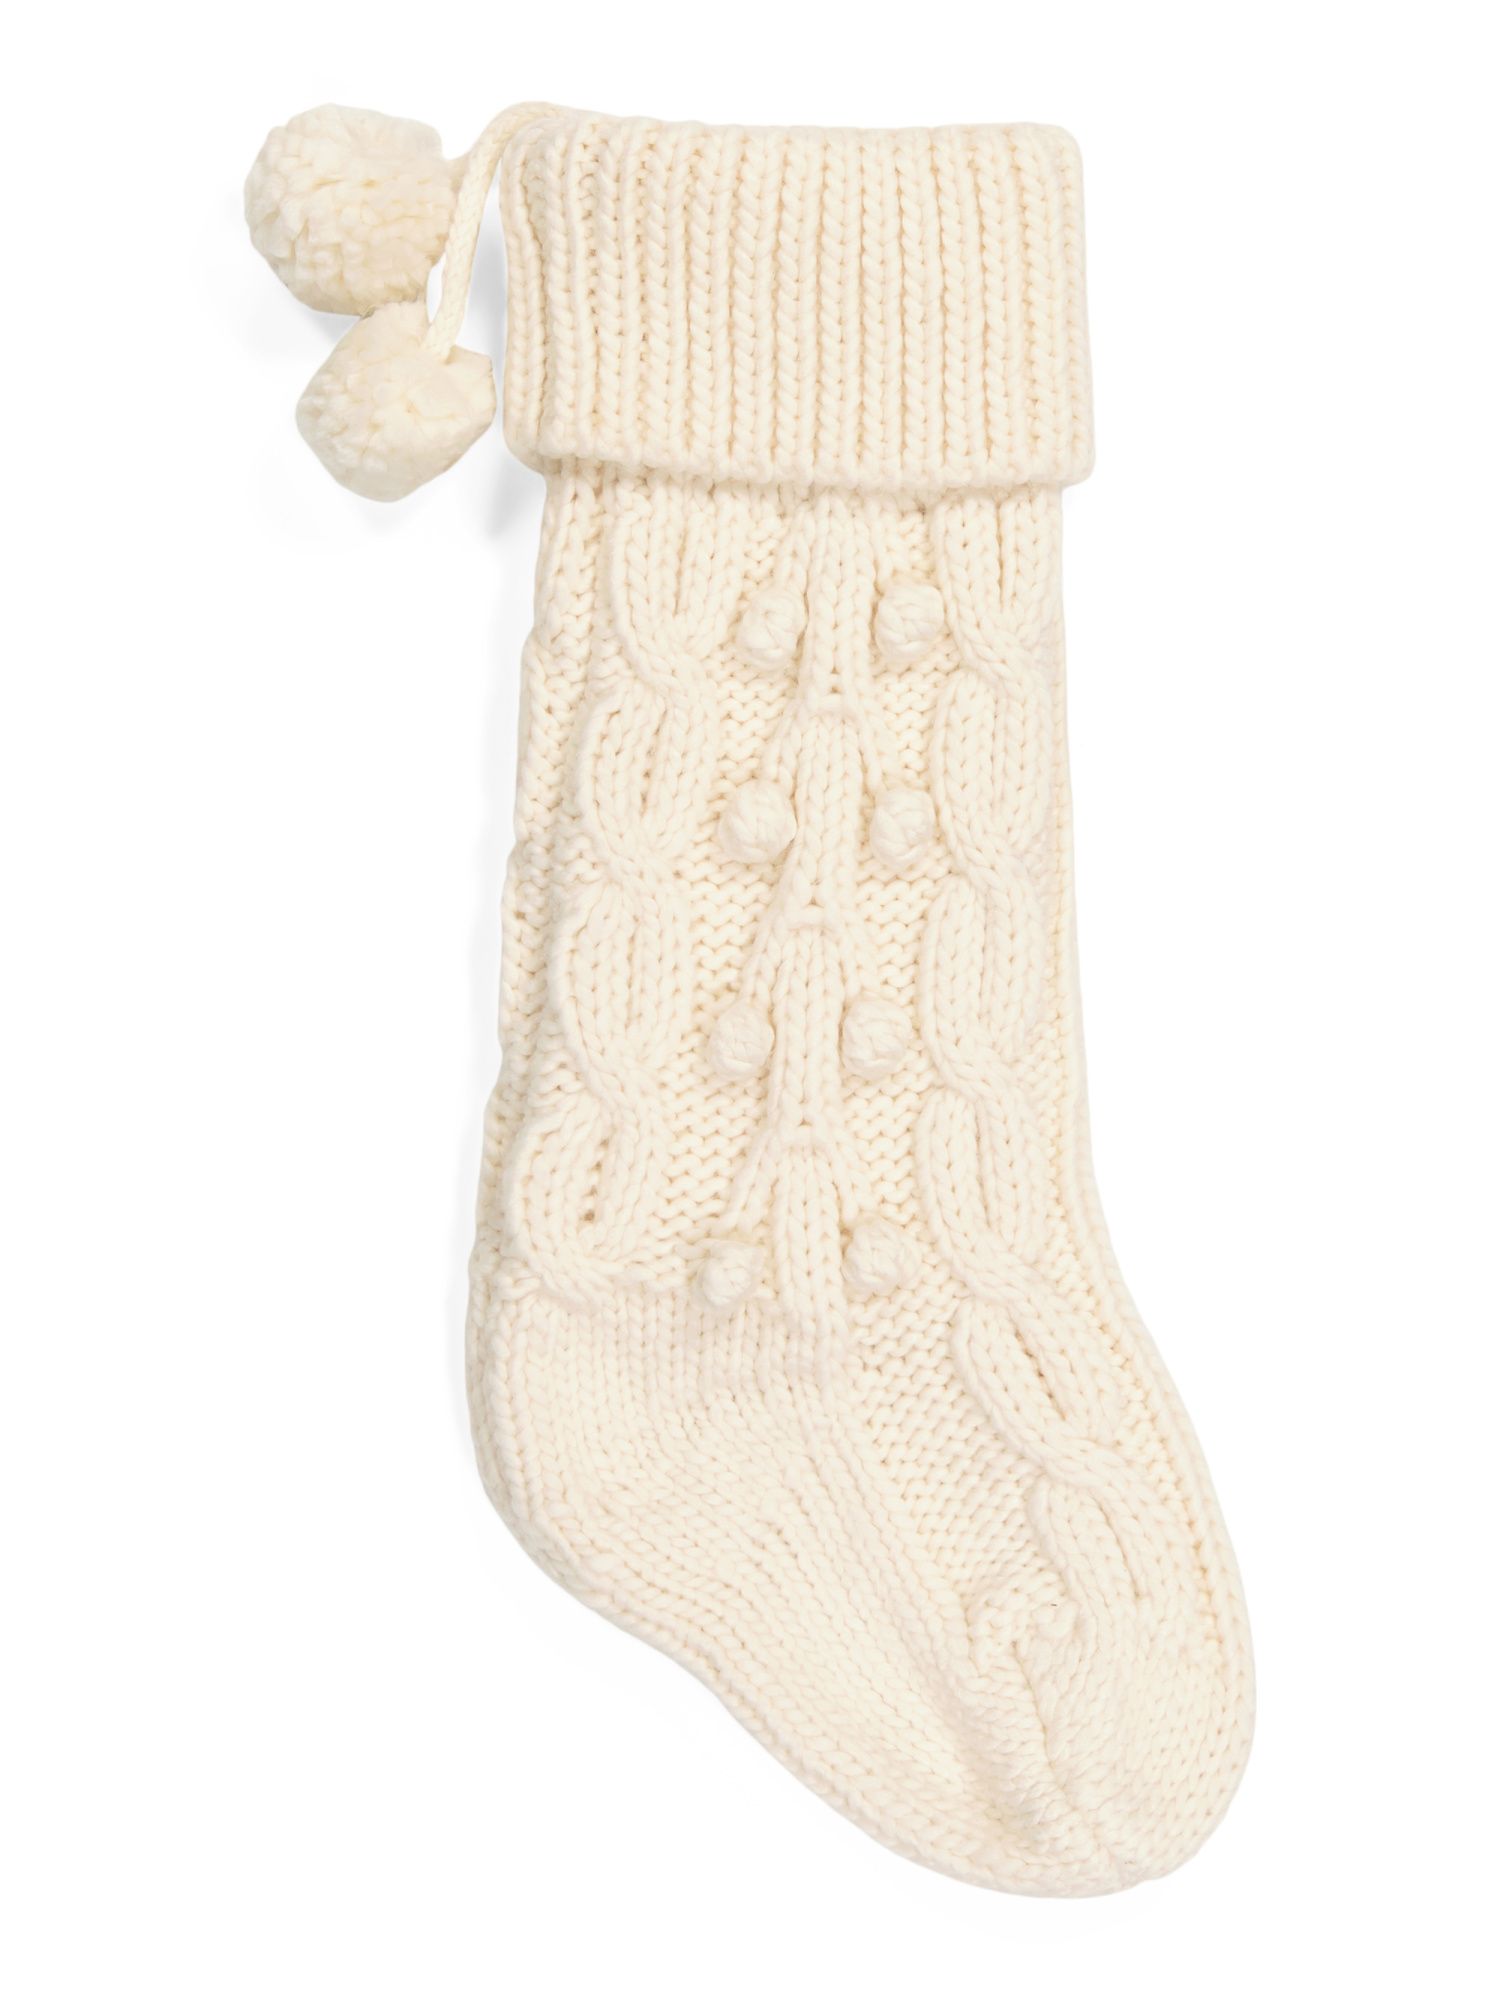 Knit Branches Stocking | Gifts For Home | Marshalls | Marshalls